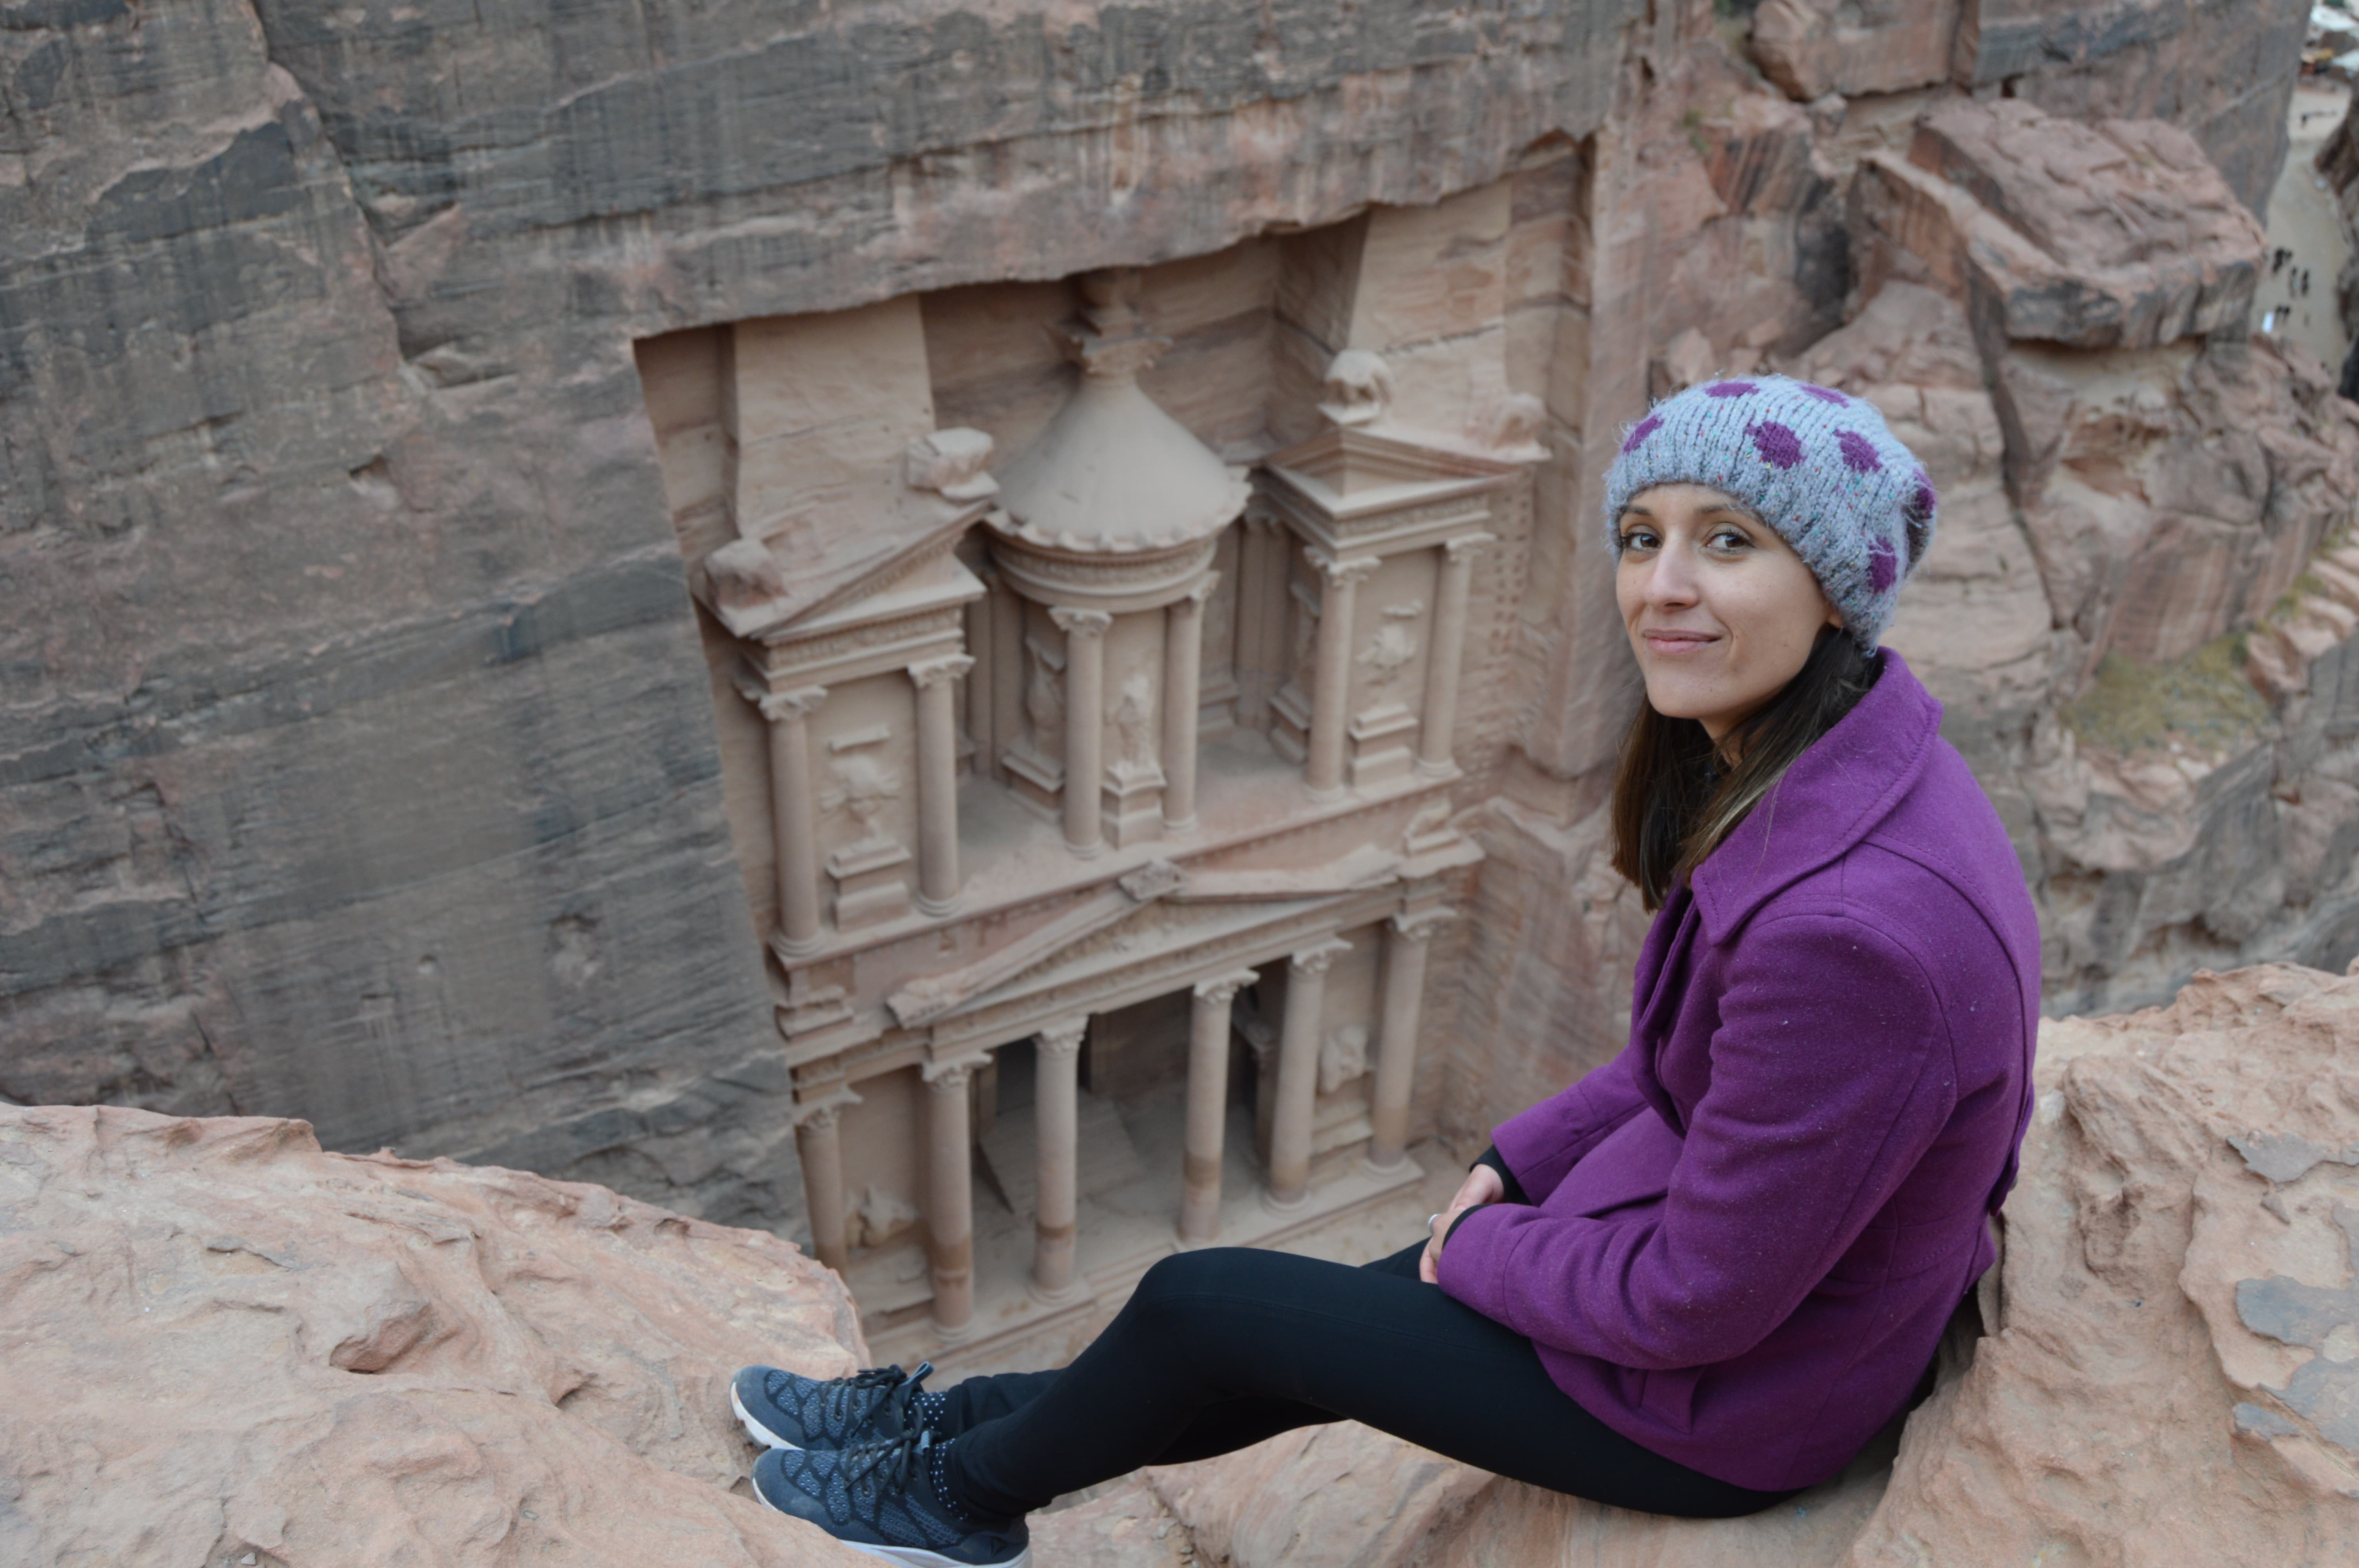 They said don’t go to Jordan – it’s unsafe!